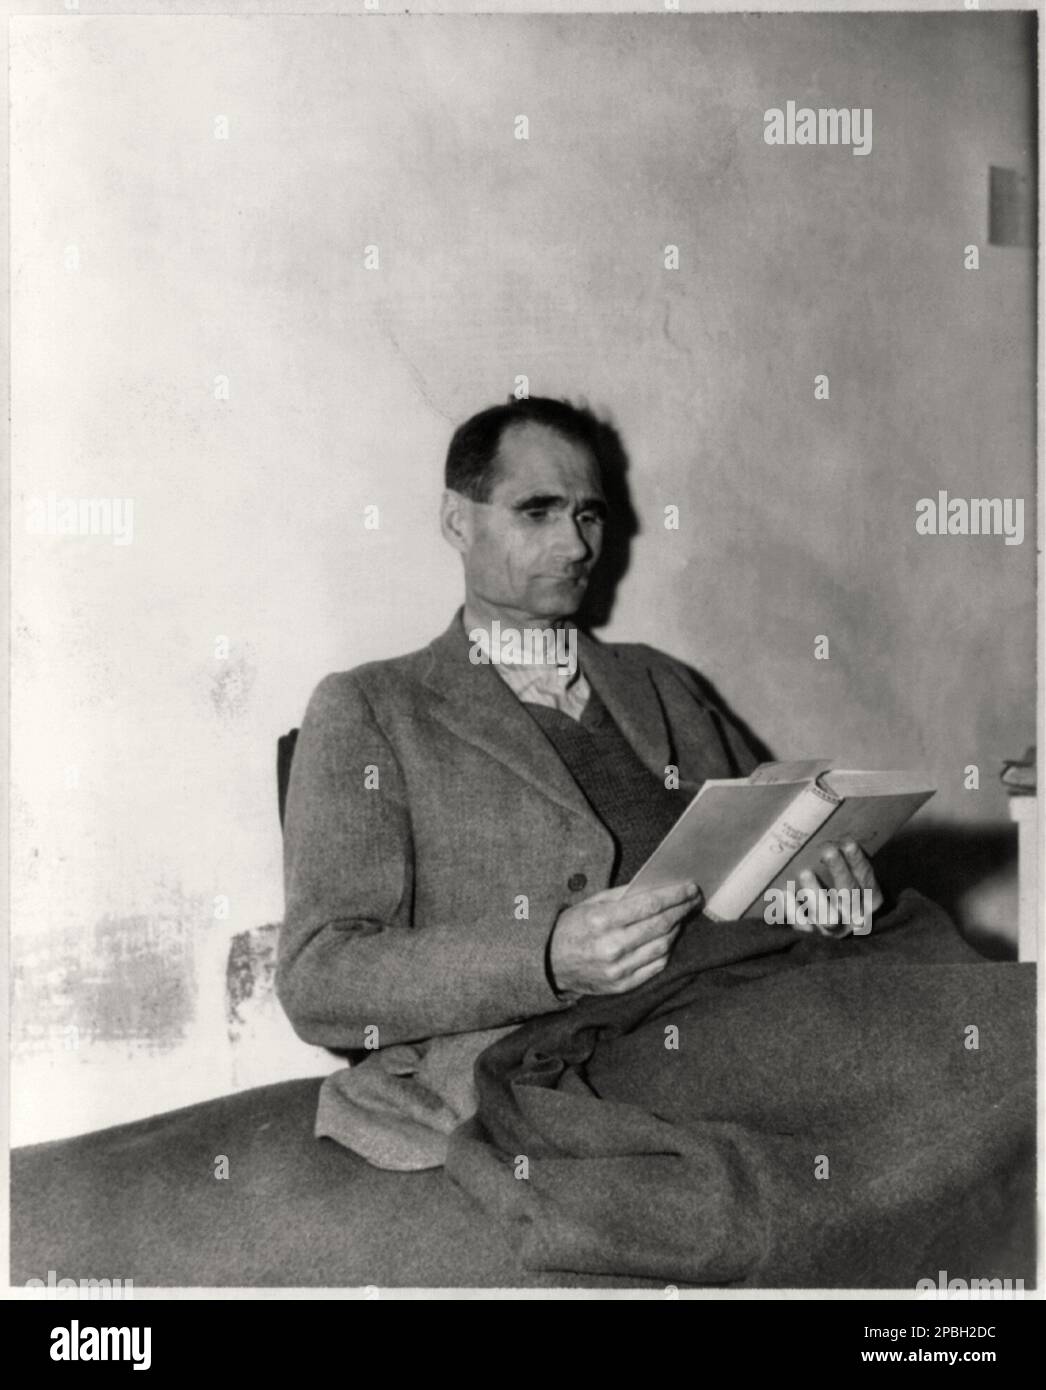 1945 , GERMANY : The german SS RUDOLF HESS ( 1894 - 1987 ) readind the book ' JUGEND ' by Ernst Claes in Landsberg Prison . Photo by special Corps US Army . was a prominent figure in Nazi Germany, acting as Adolf Hitler 's deputy in the Nazi Party. On the eve of war with the Soviet Union, he flew solo to Scotland in an attempt to negotiate peace with the United Kingdom, but instead was arrested. He was tried at Nuremberg and sentenced to life in prison at Spandau Prison, where he remained until his death in 1987 as a result of strangulation by an electrical cord. The official cause of death wa Stock Photo